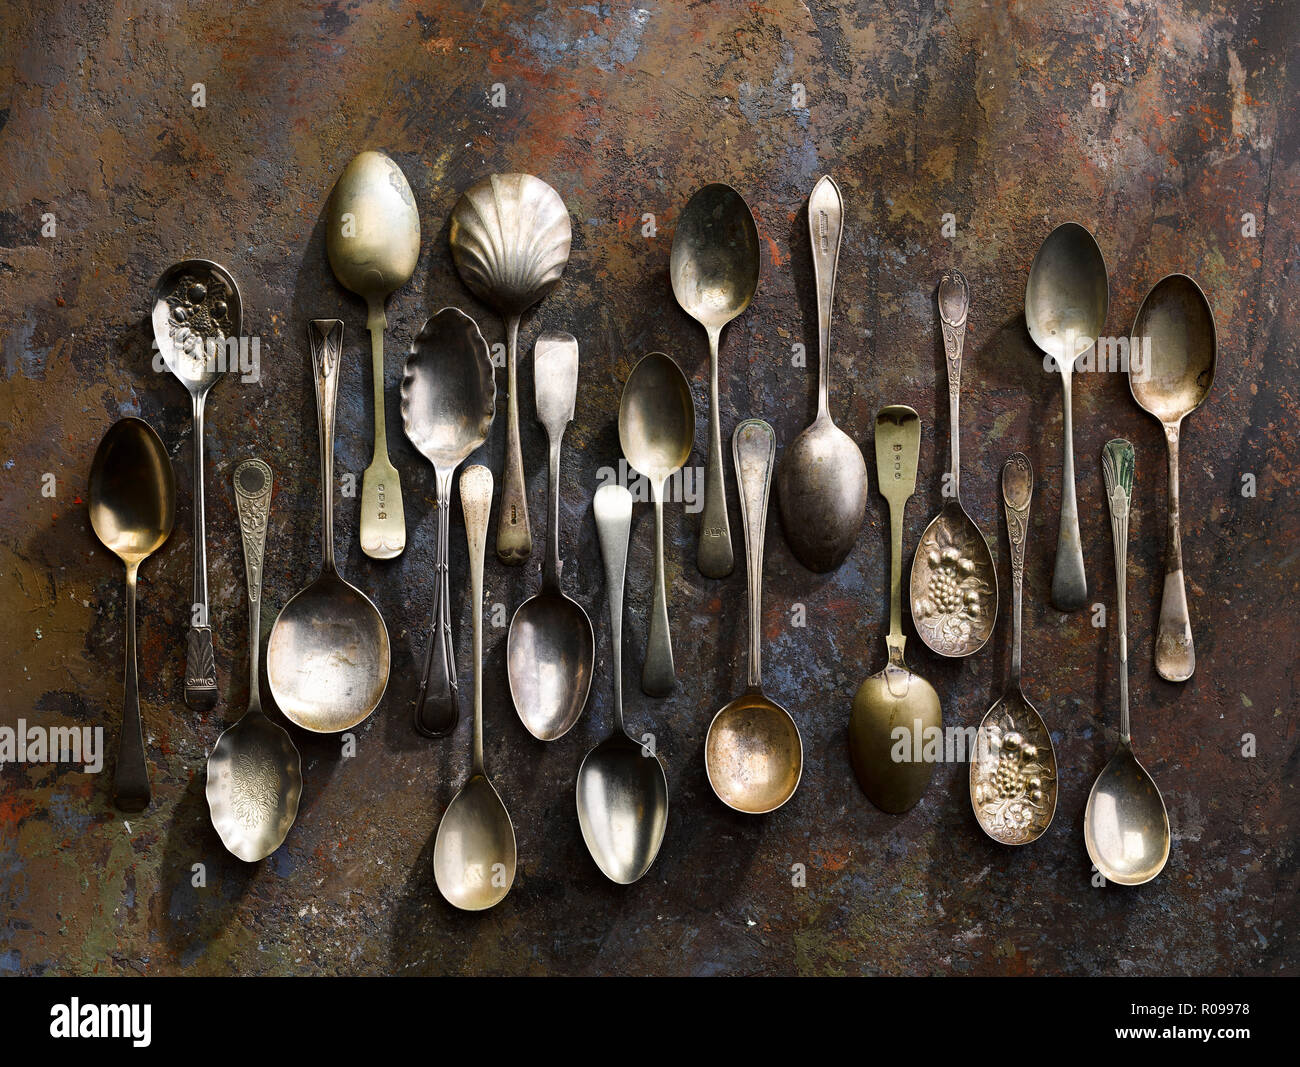 Hyperfocal technique on group of spoons Stock Photo